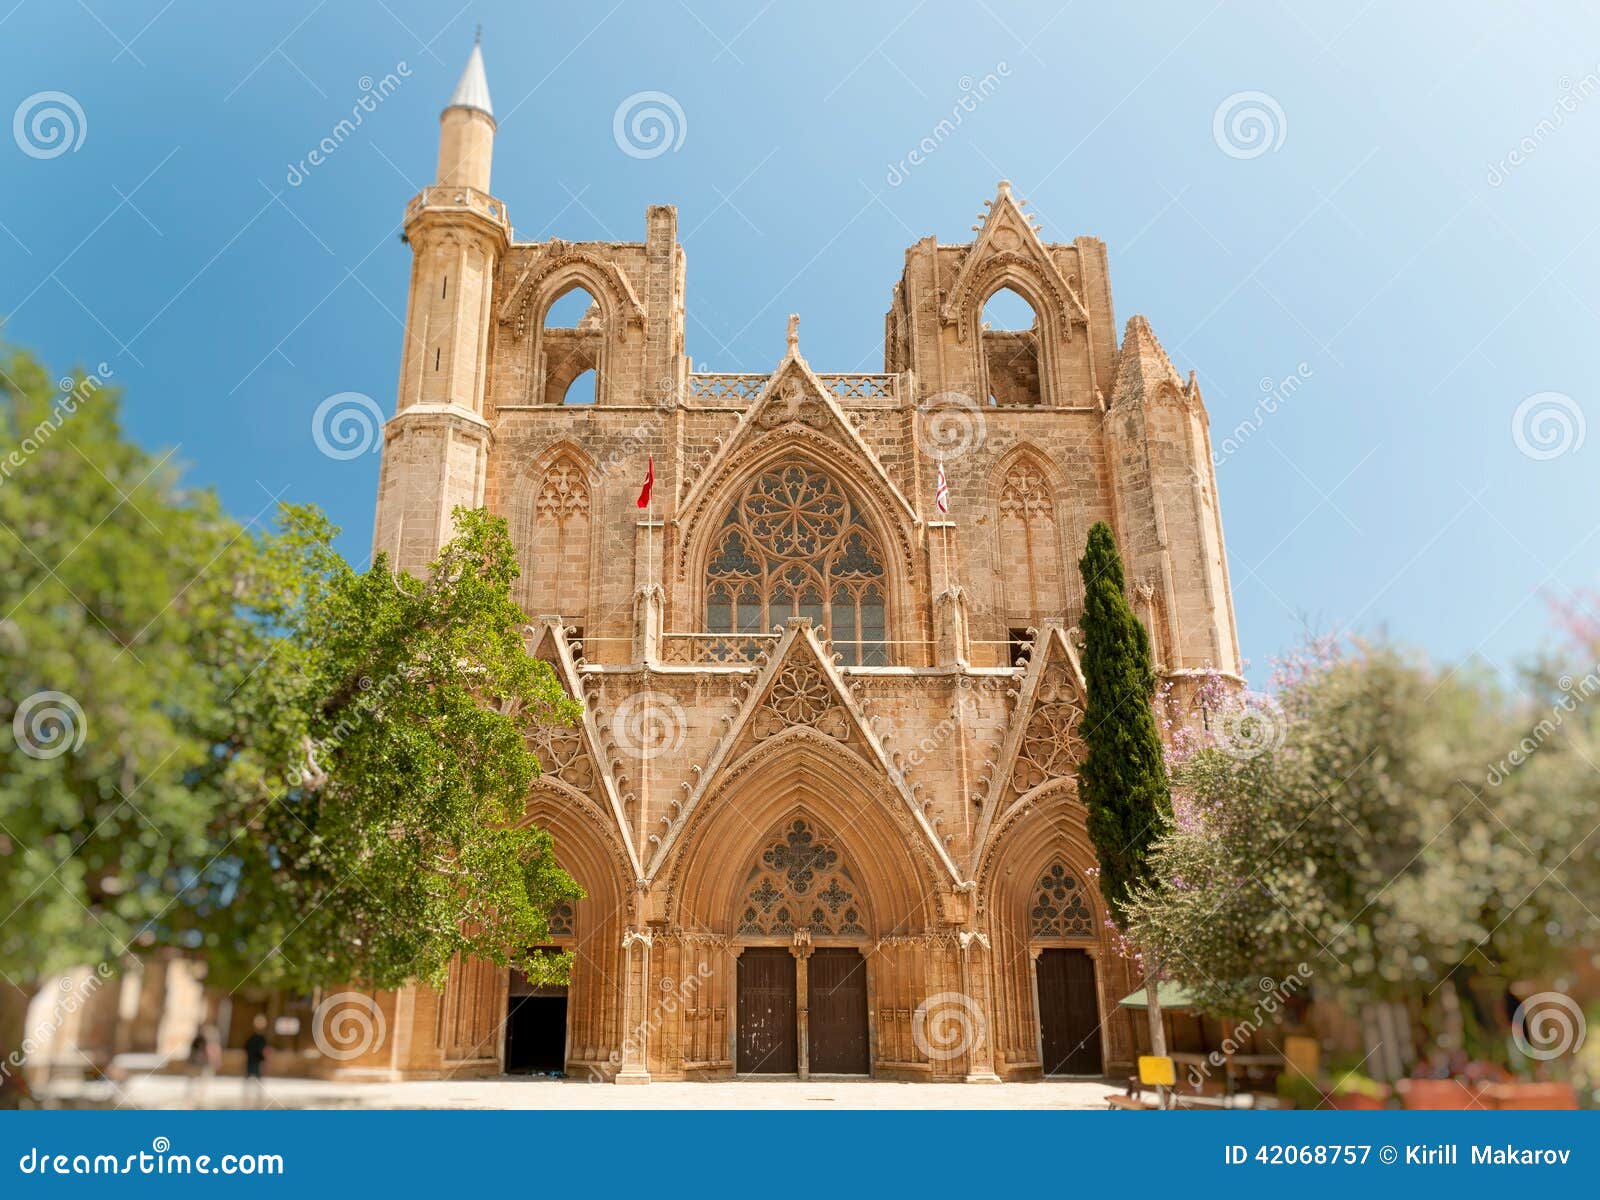 lala mustafa pasha mosque (formerly st. nicholas cathedral), famagusta, northern cyprus.